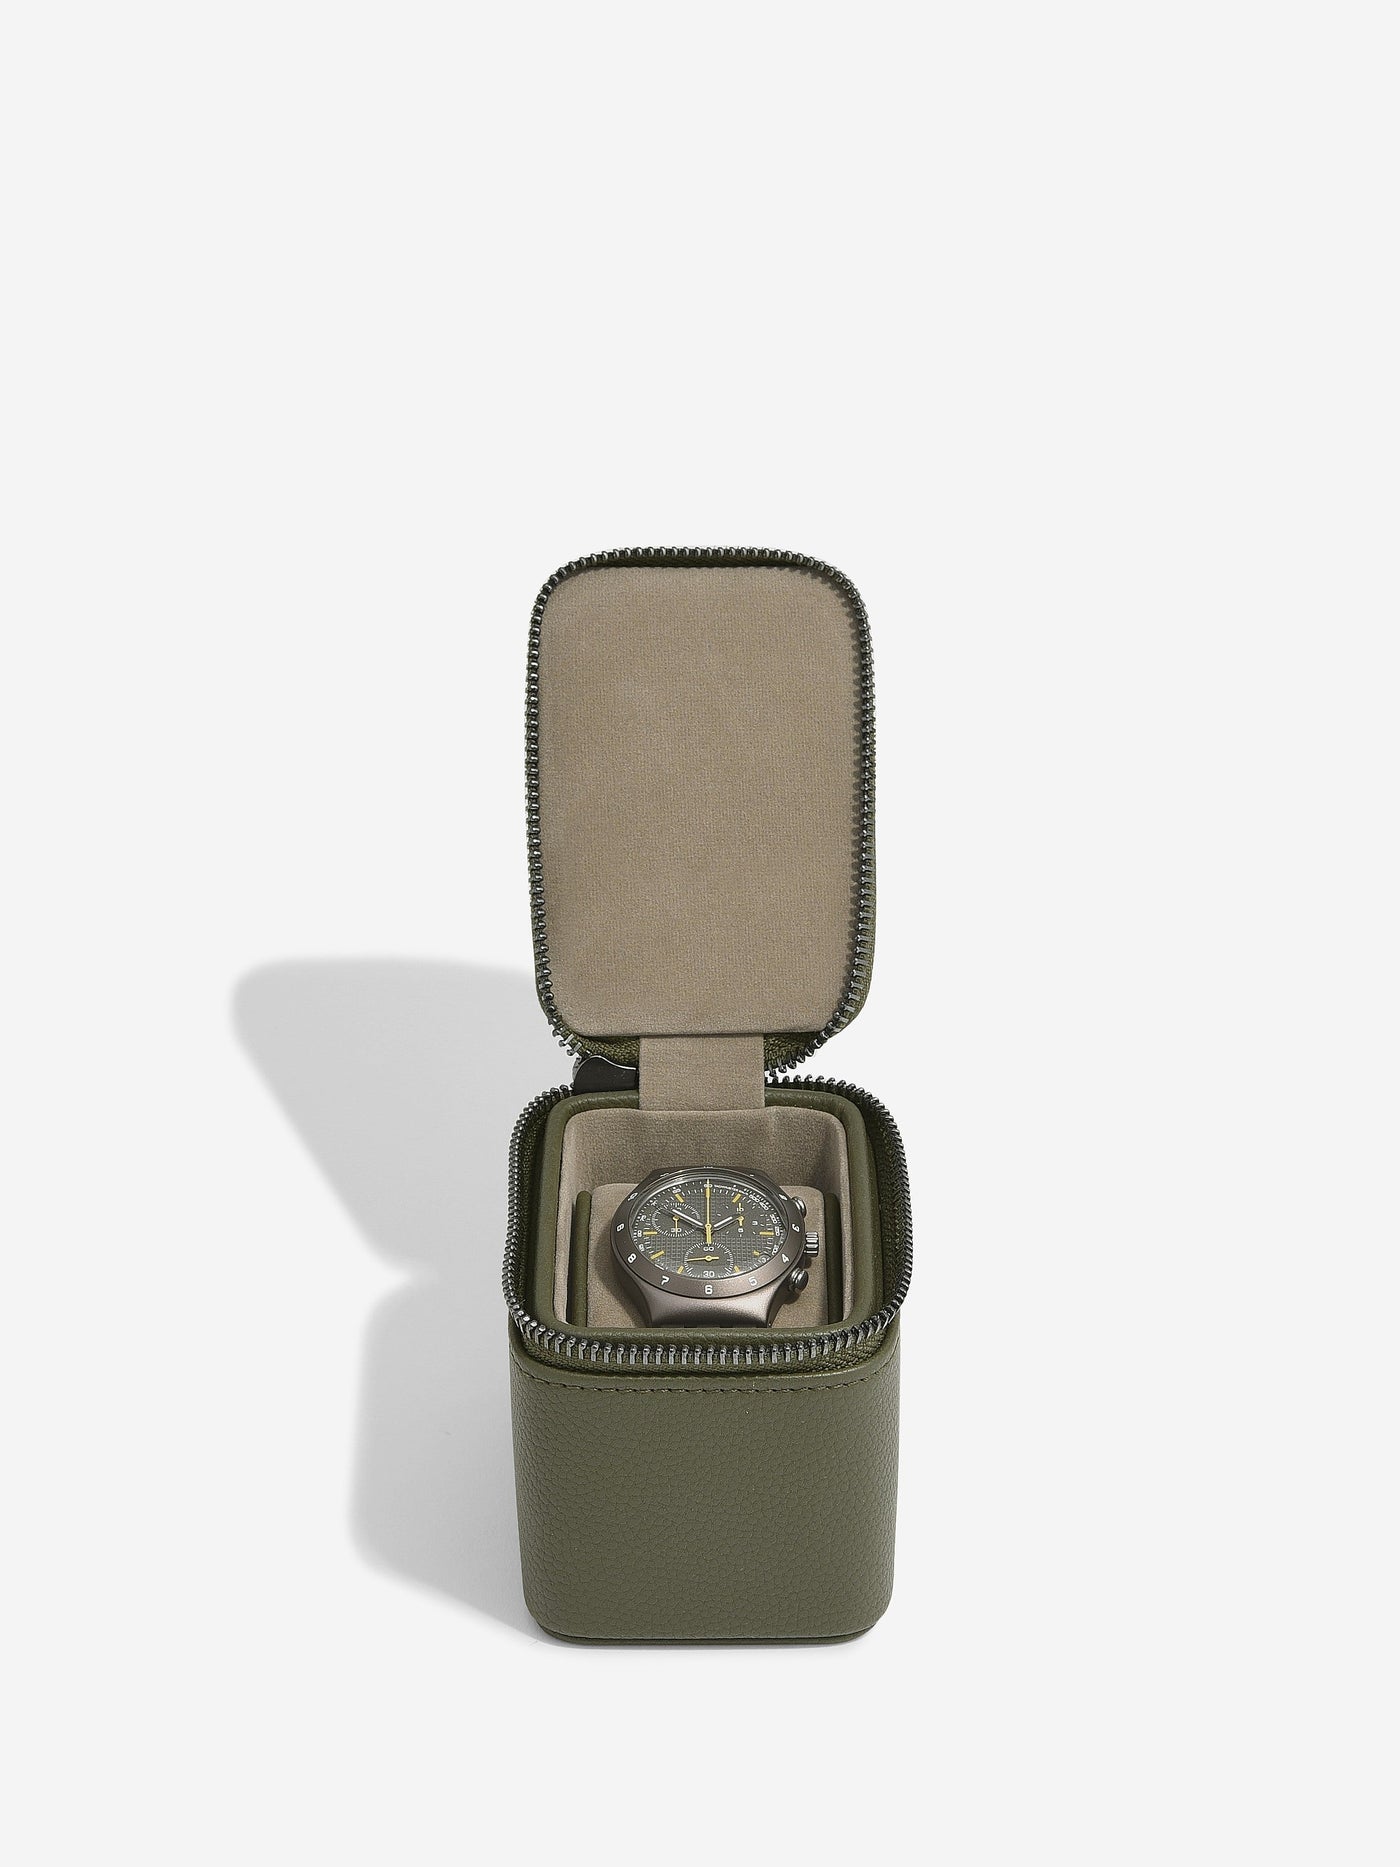 Stackers. Olive Green Pebble Small Zipped Travel Watch Box - timeframedclocks